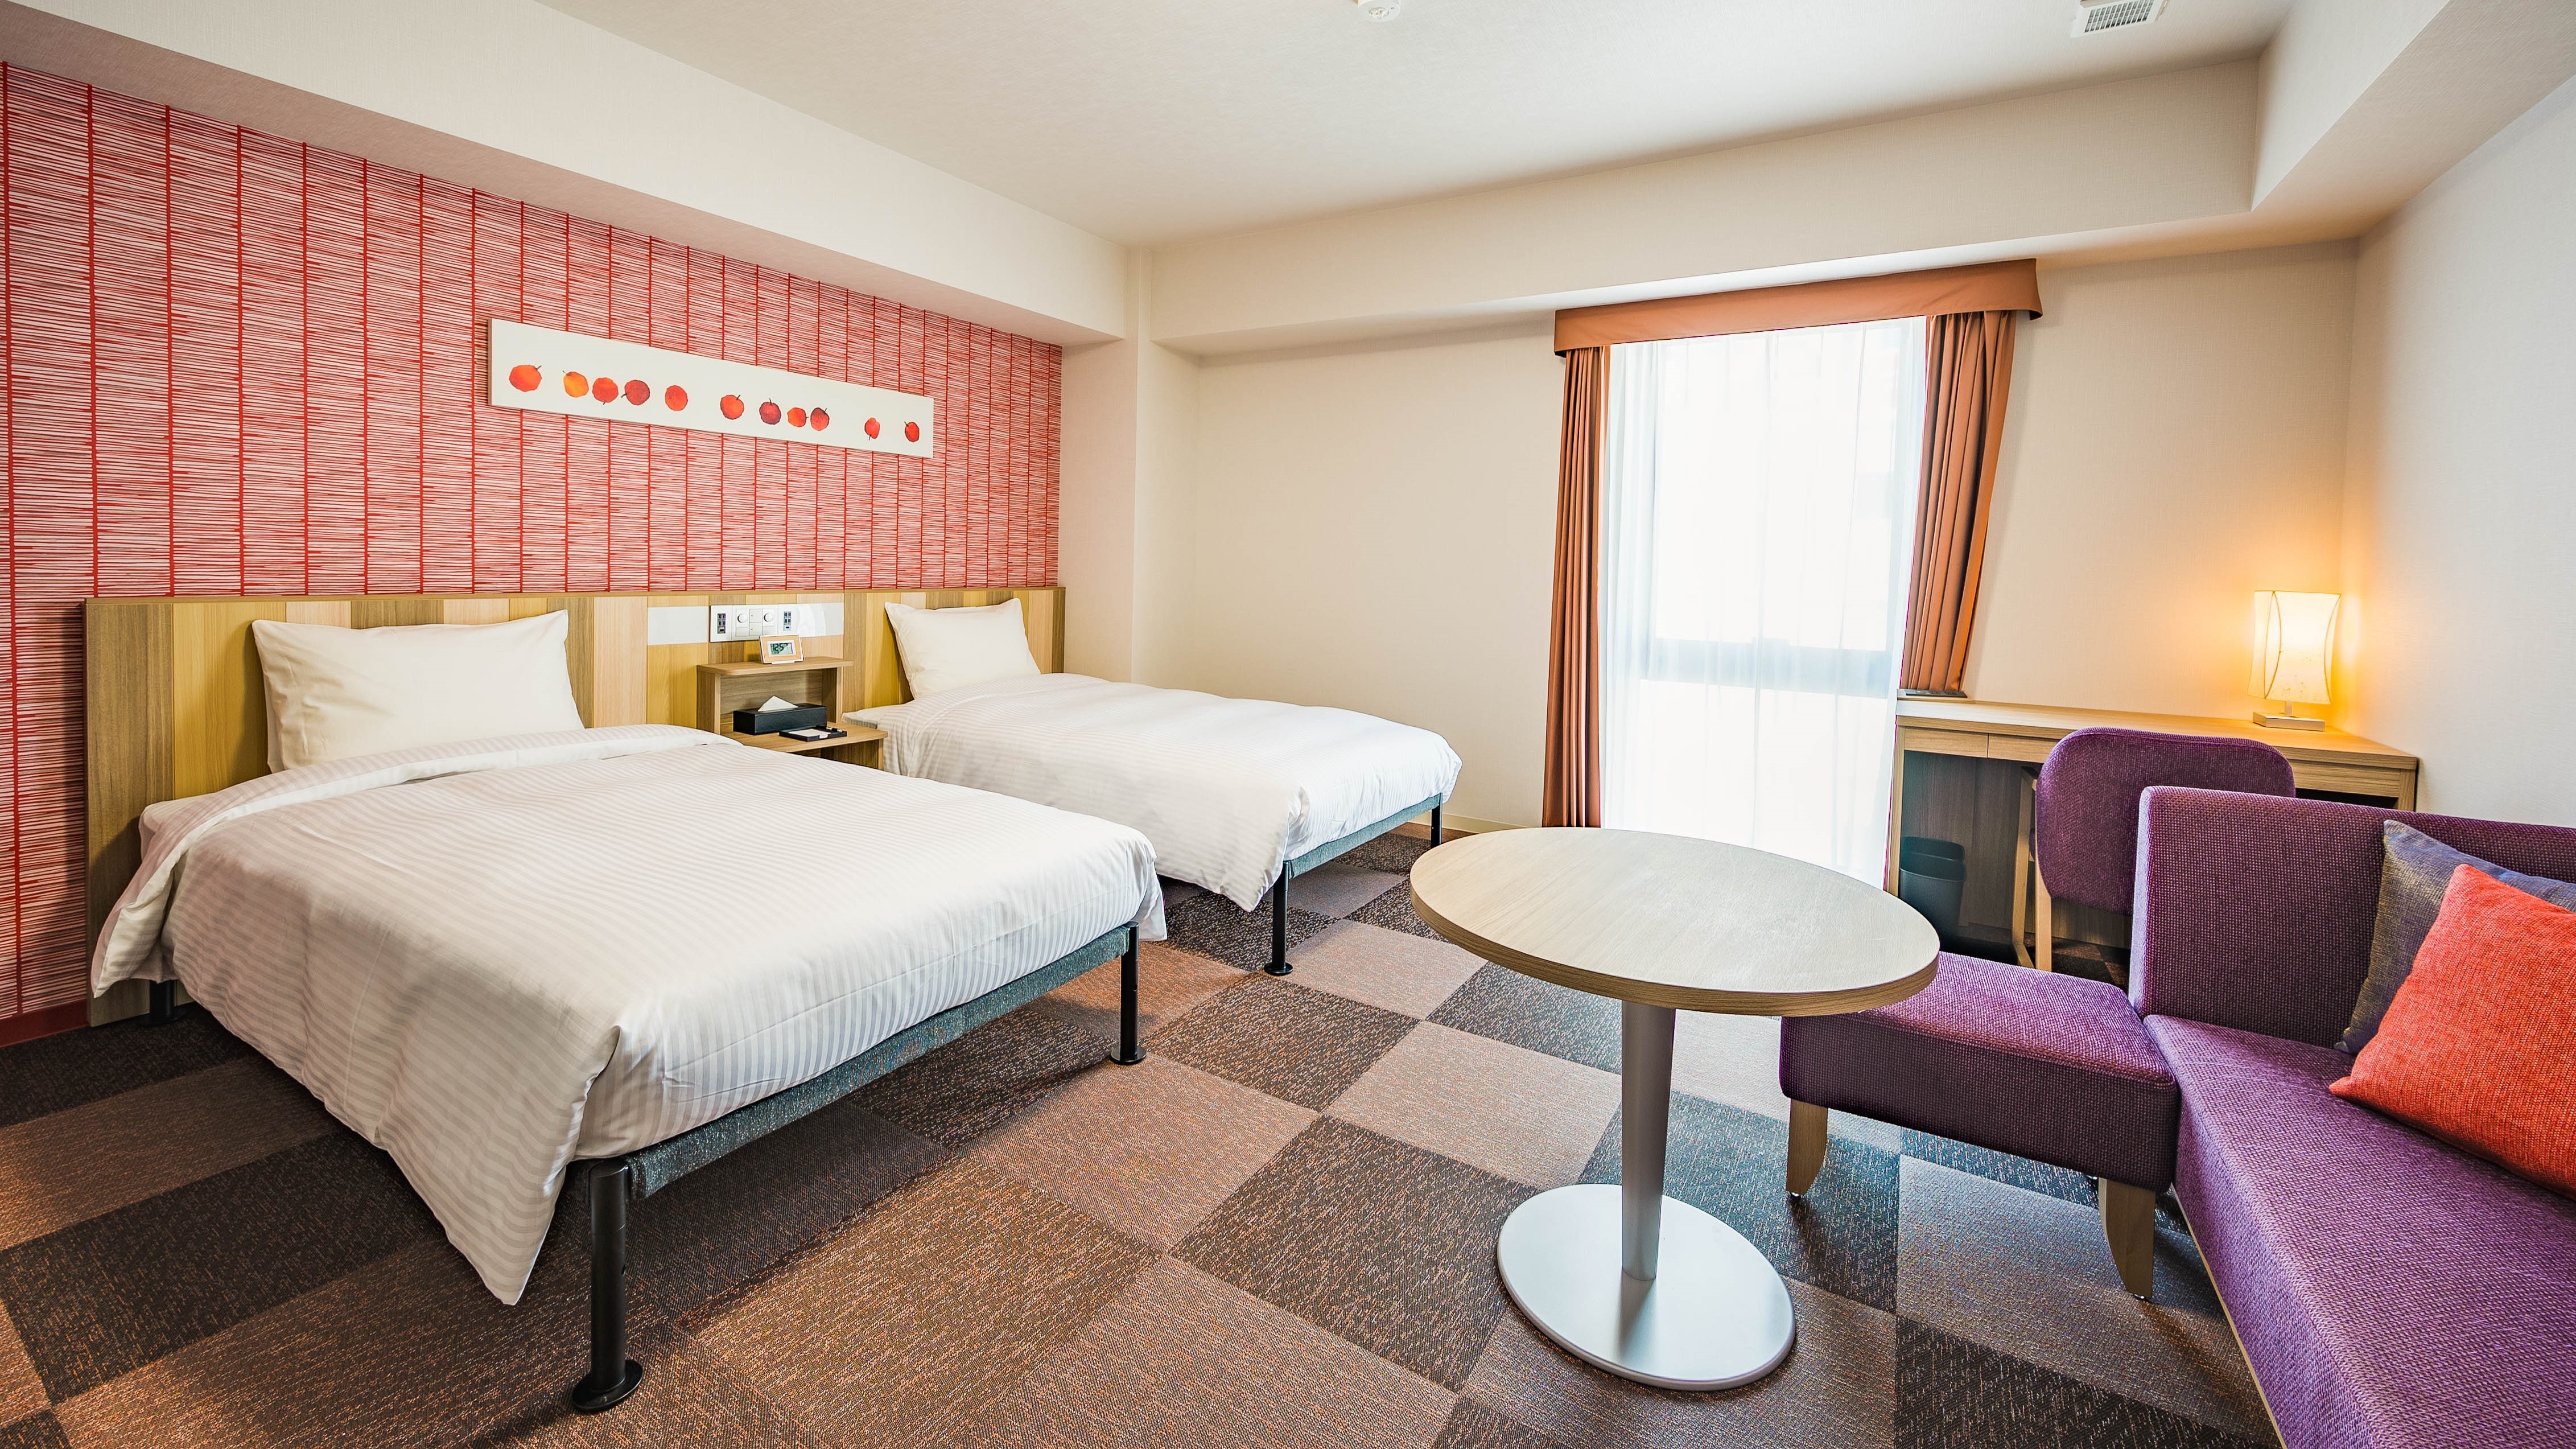 Deluxe Twin 32㎡ Room where you can relax with bare feet.